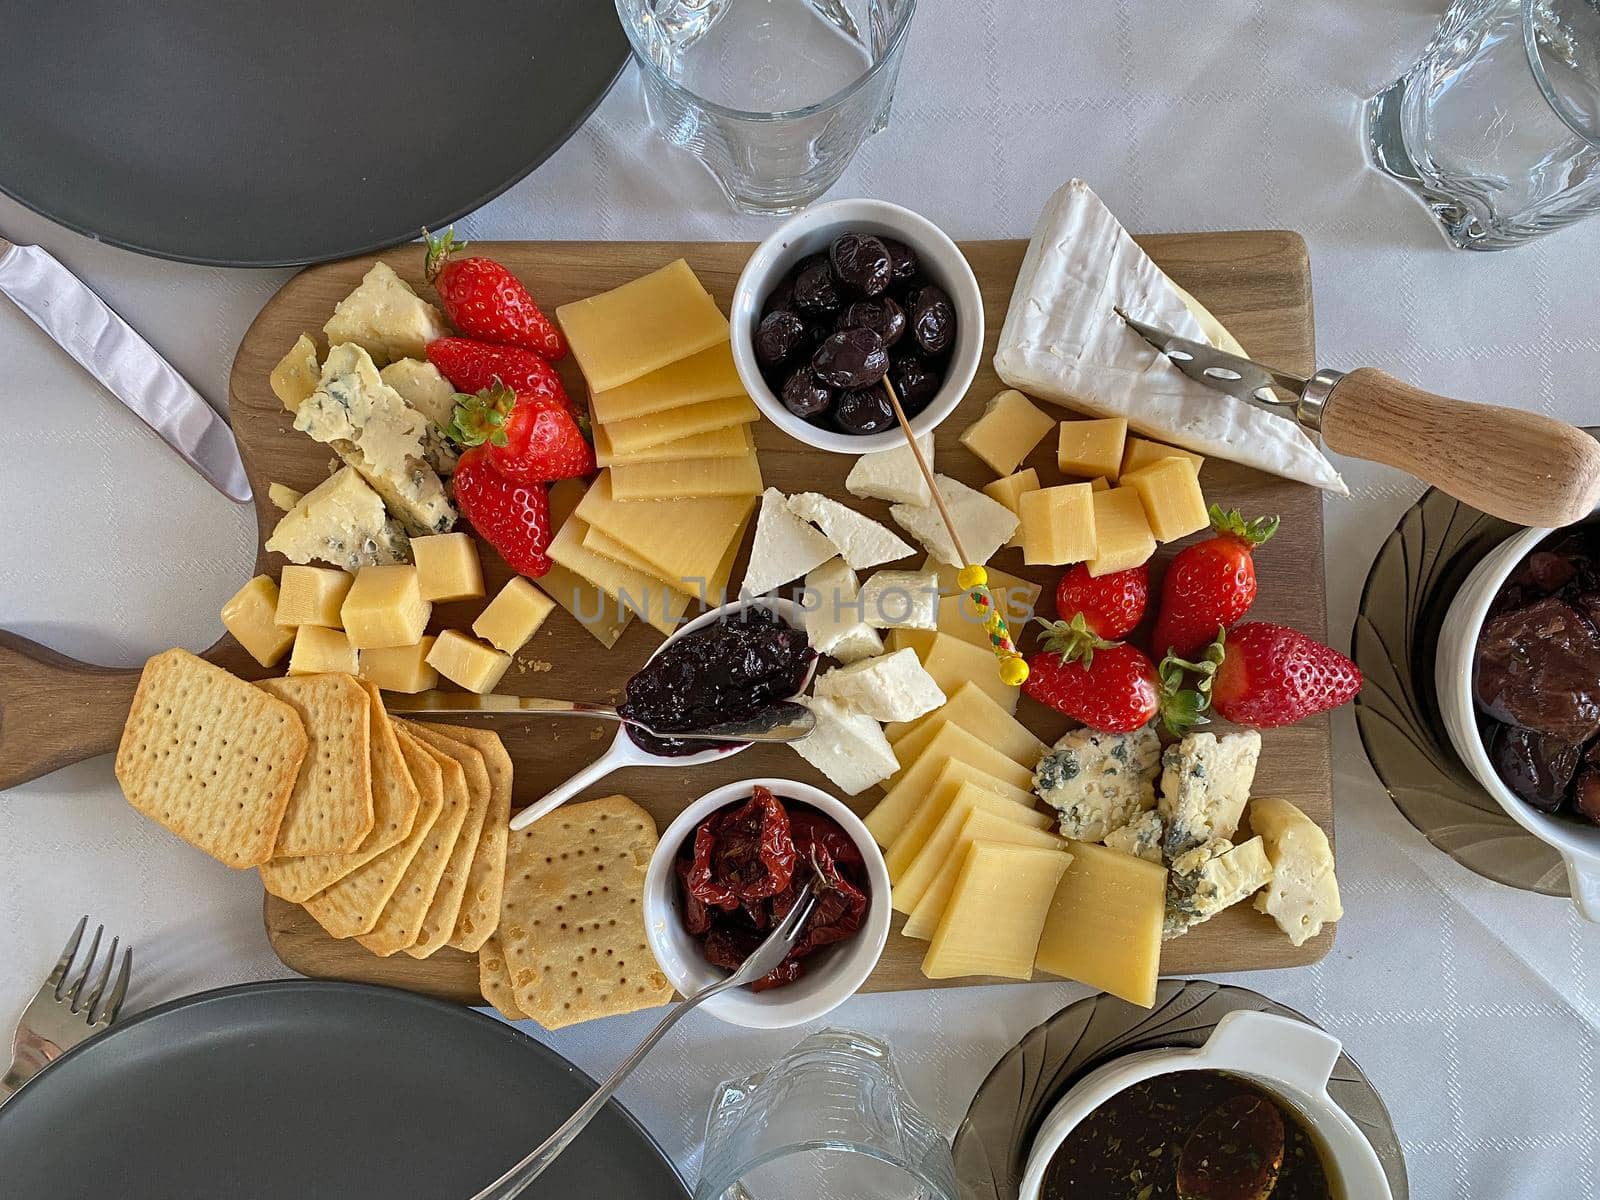 Cheese plate with camembert, brie, dor blue, strawberries, sun-dried tomatoes, olives on a wooden table, top view.